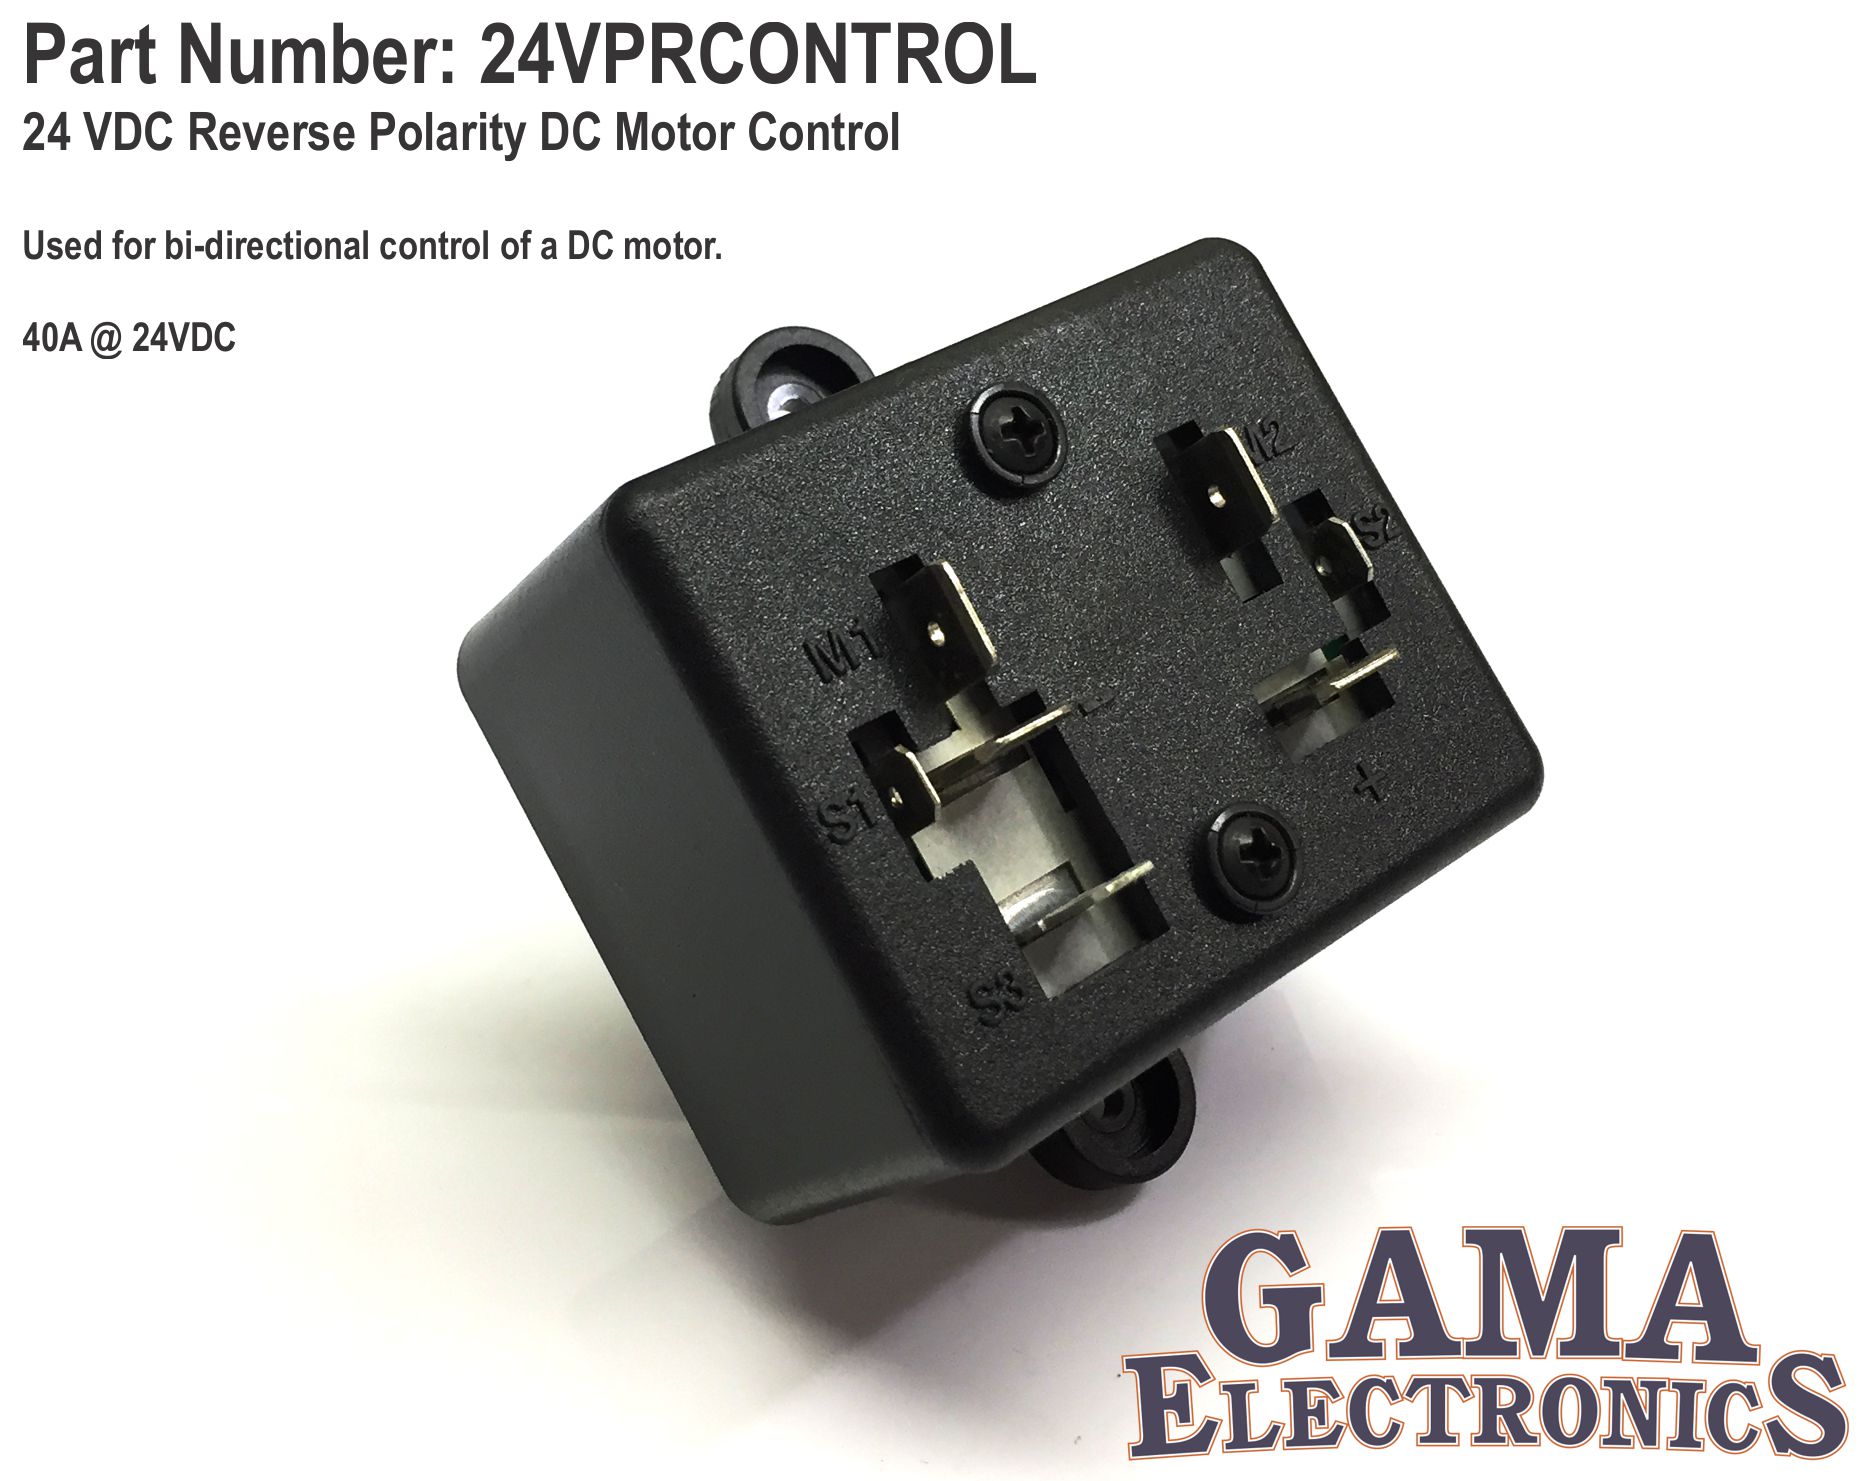 24VPRCONTROL - Gama Electronics single pole double throw momentary switch wiring diagram 